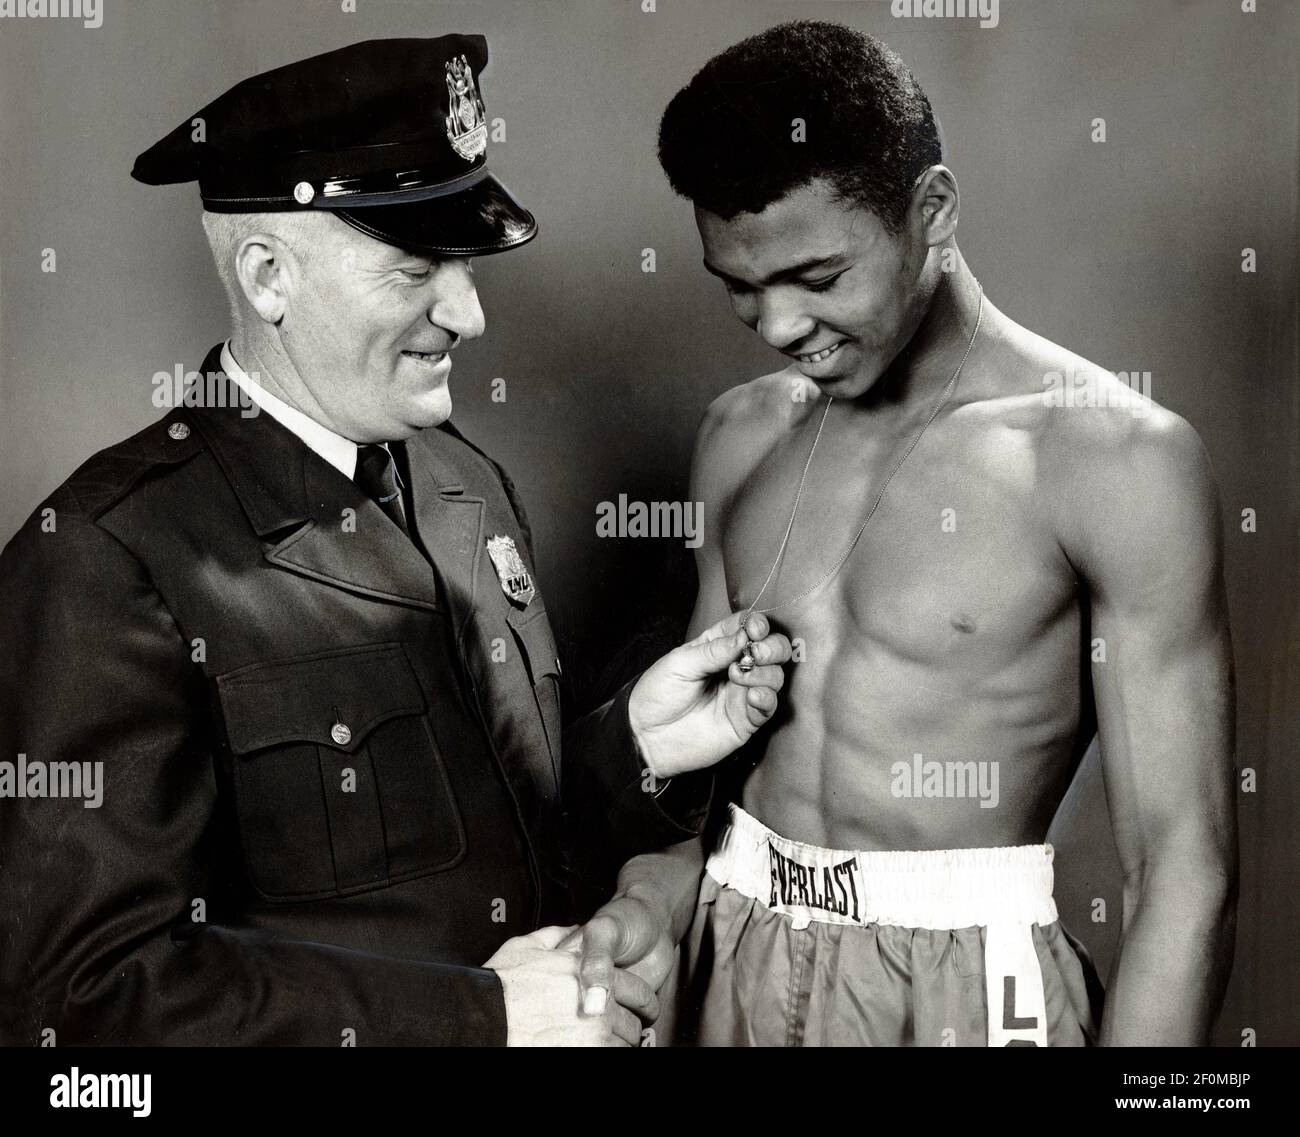 Mar 29, 1959; Louisville, KY, USA; FILE PHOTO; Policeman and mentor Joe  Martin congratulates Cassius Clay aka Muhammad Ali as he admires his golden  gloves ring. Mandatory Credit: Chas. Kays/The Courier-Journal-USA TODAY